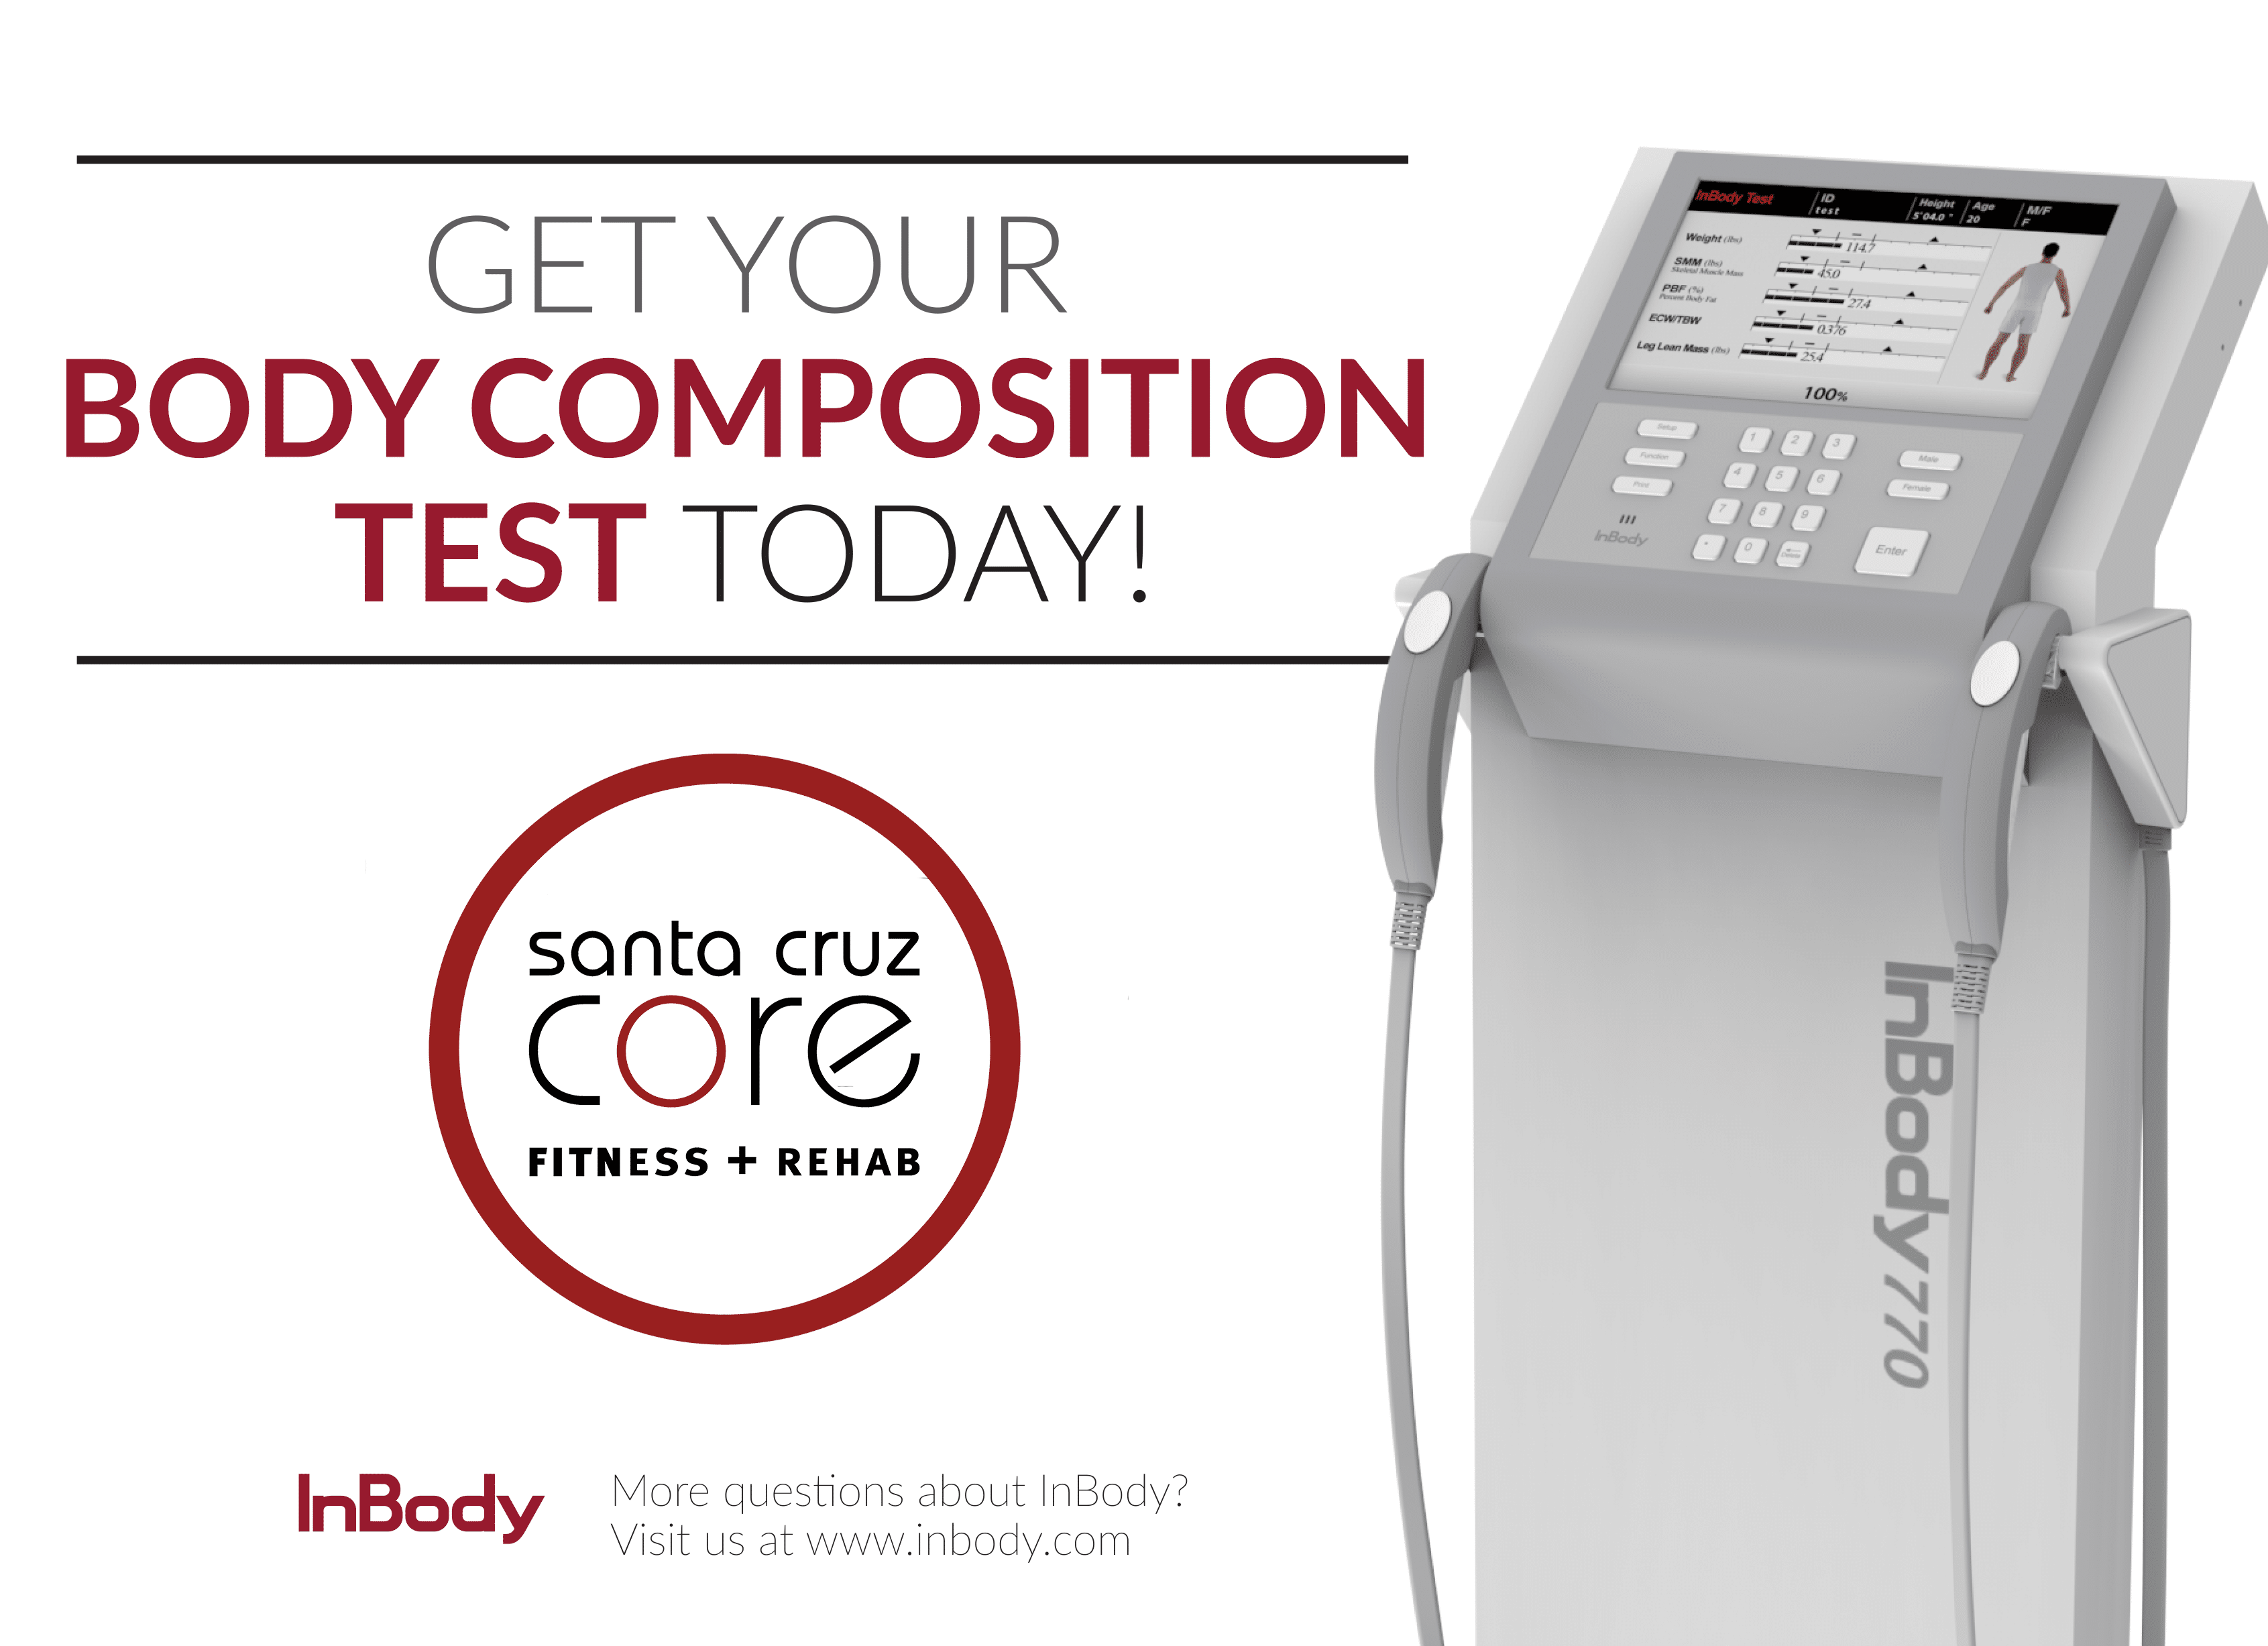 Get your body composition test and fitness assessment from Santa Cruz Core today!